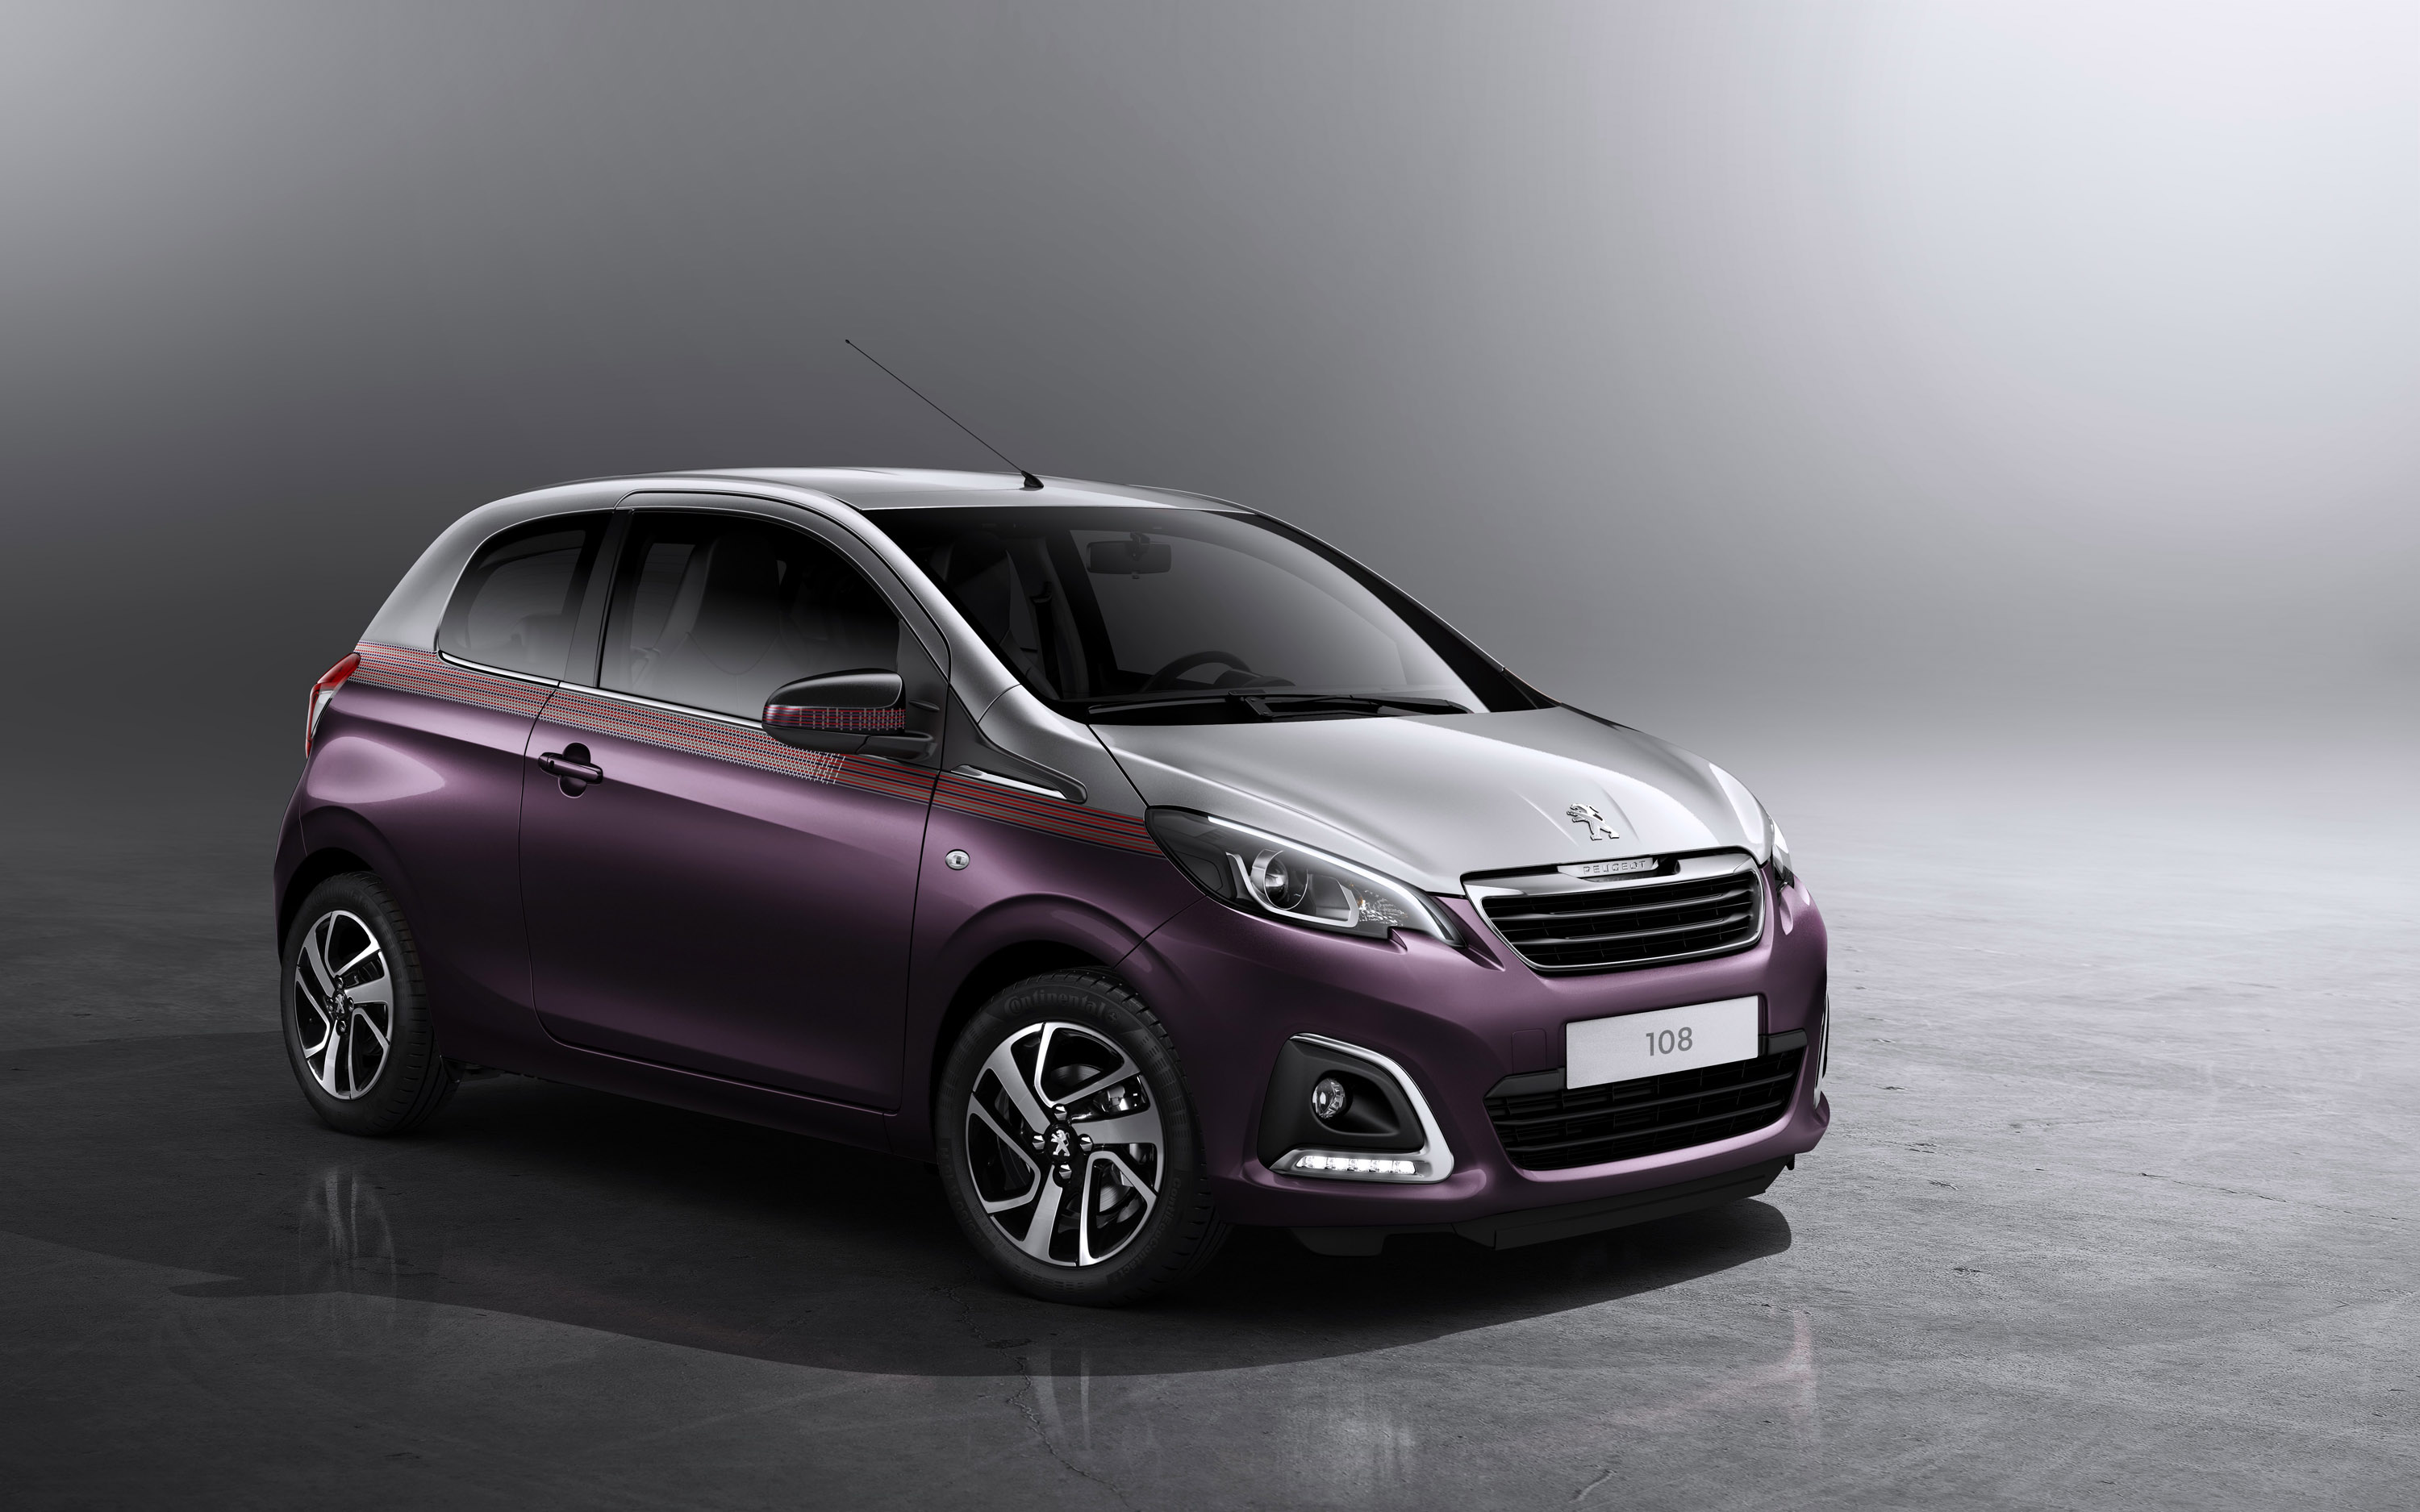 2014 Peugeot 108 Release Date Announced